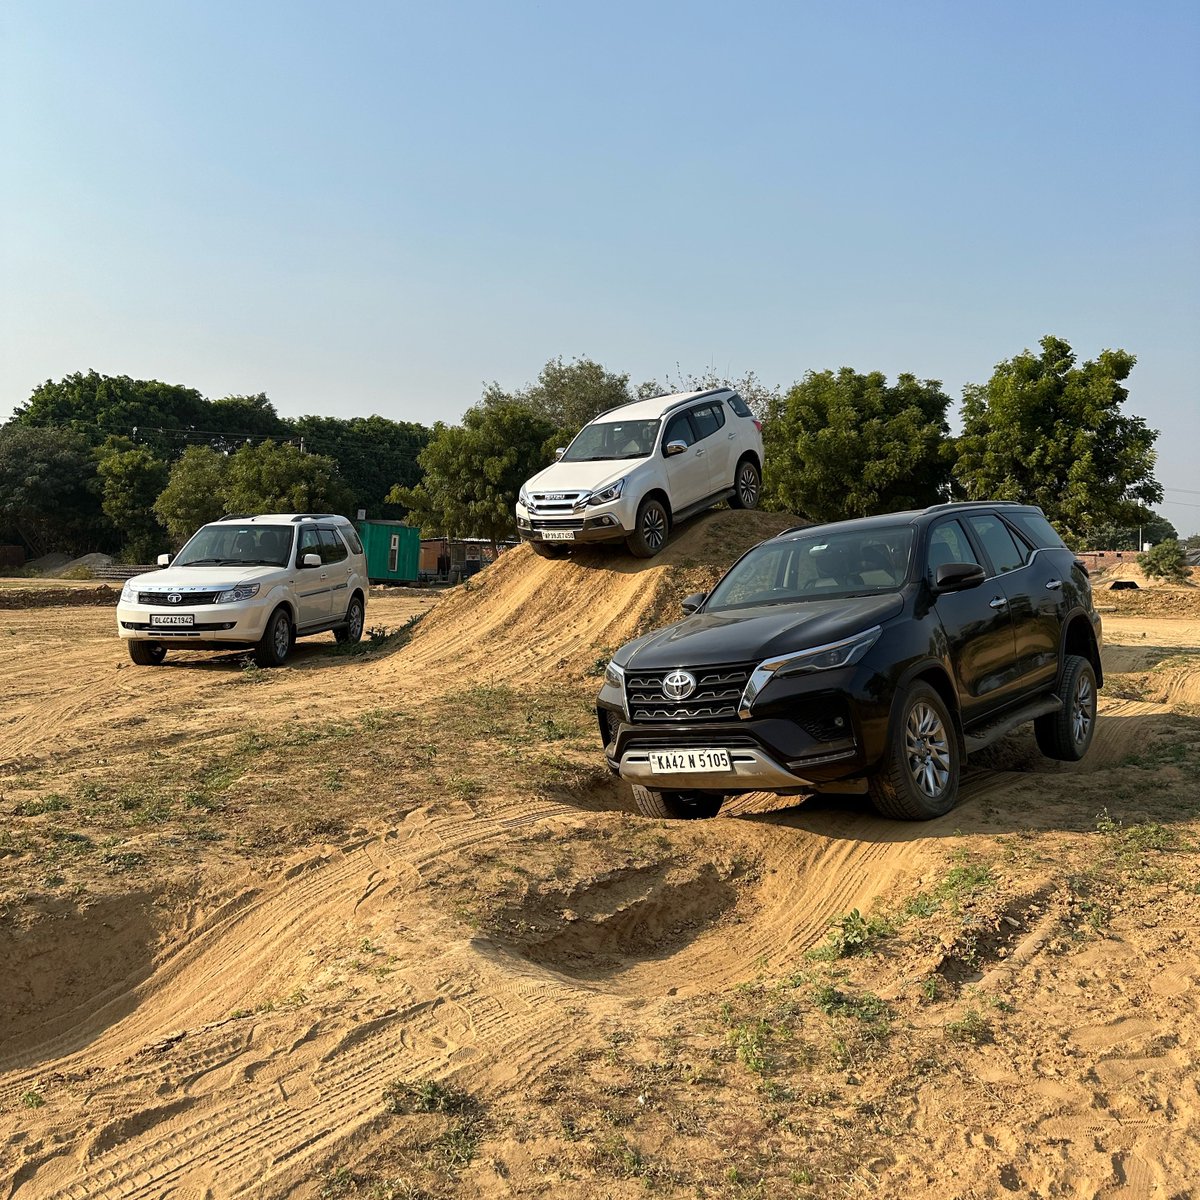 Which one of these beasts would you pick?

#TataSafari #IsuzuMUX #ToyotaFortuner